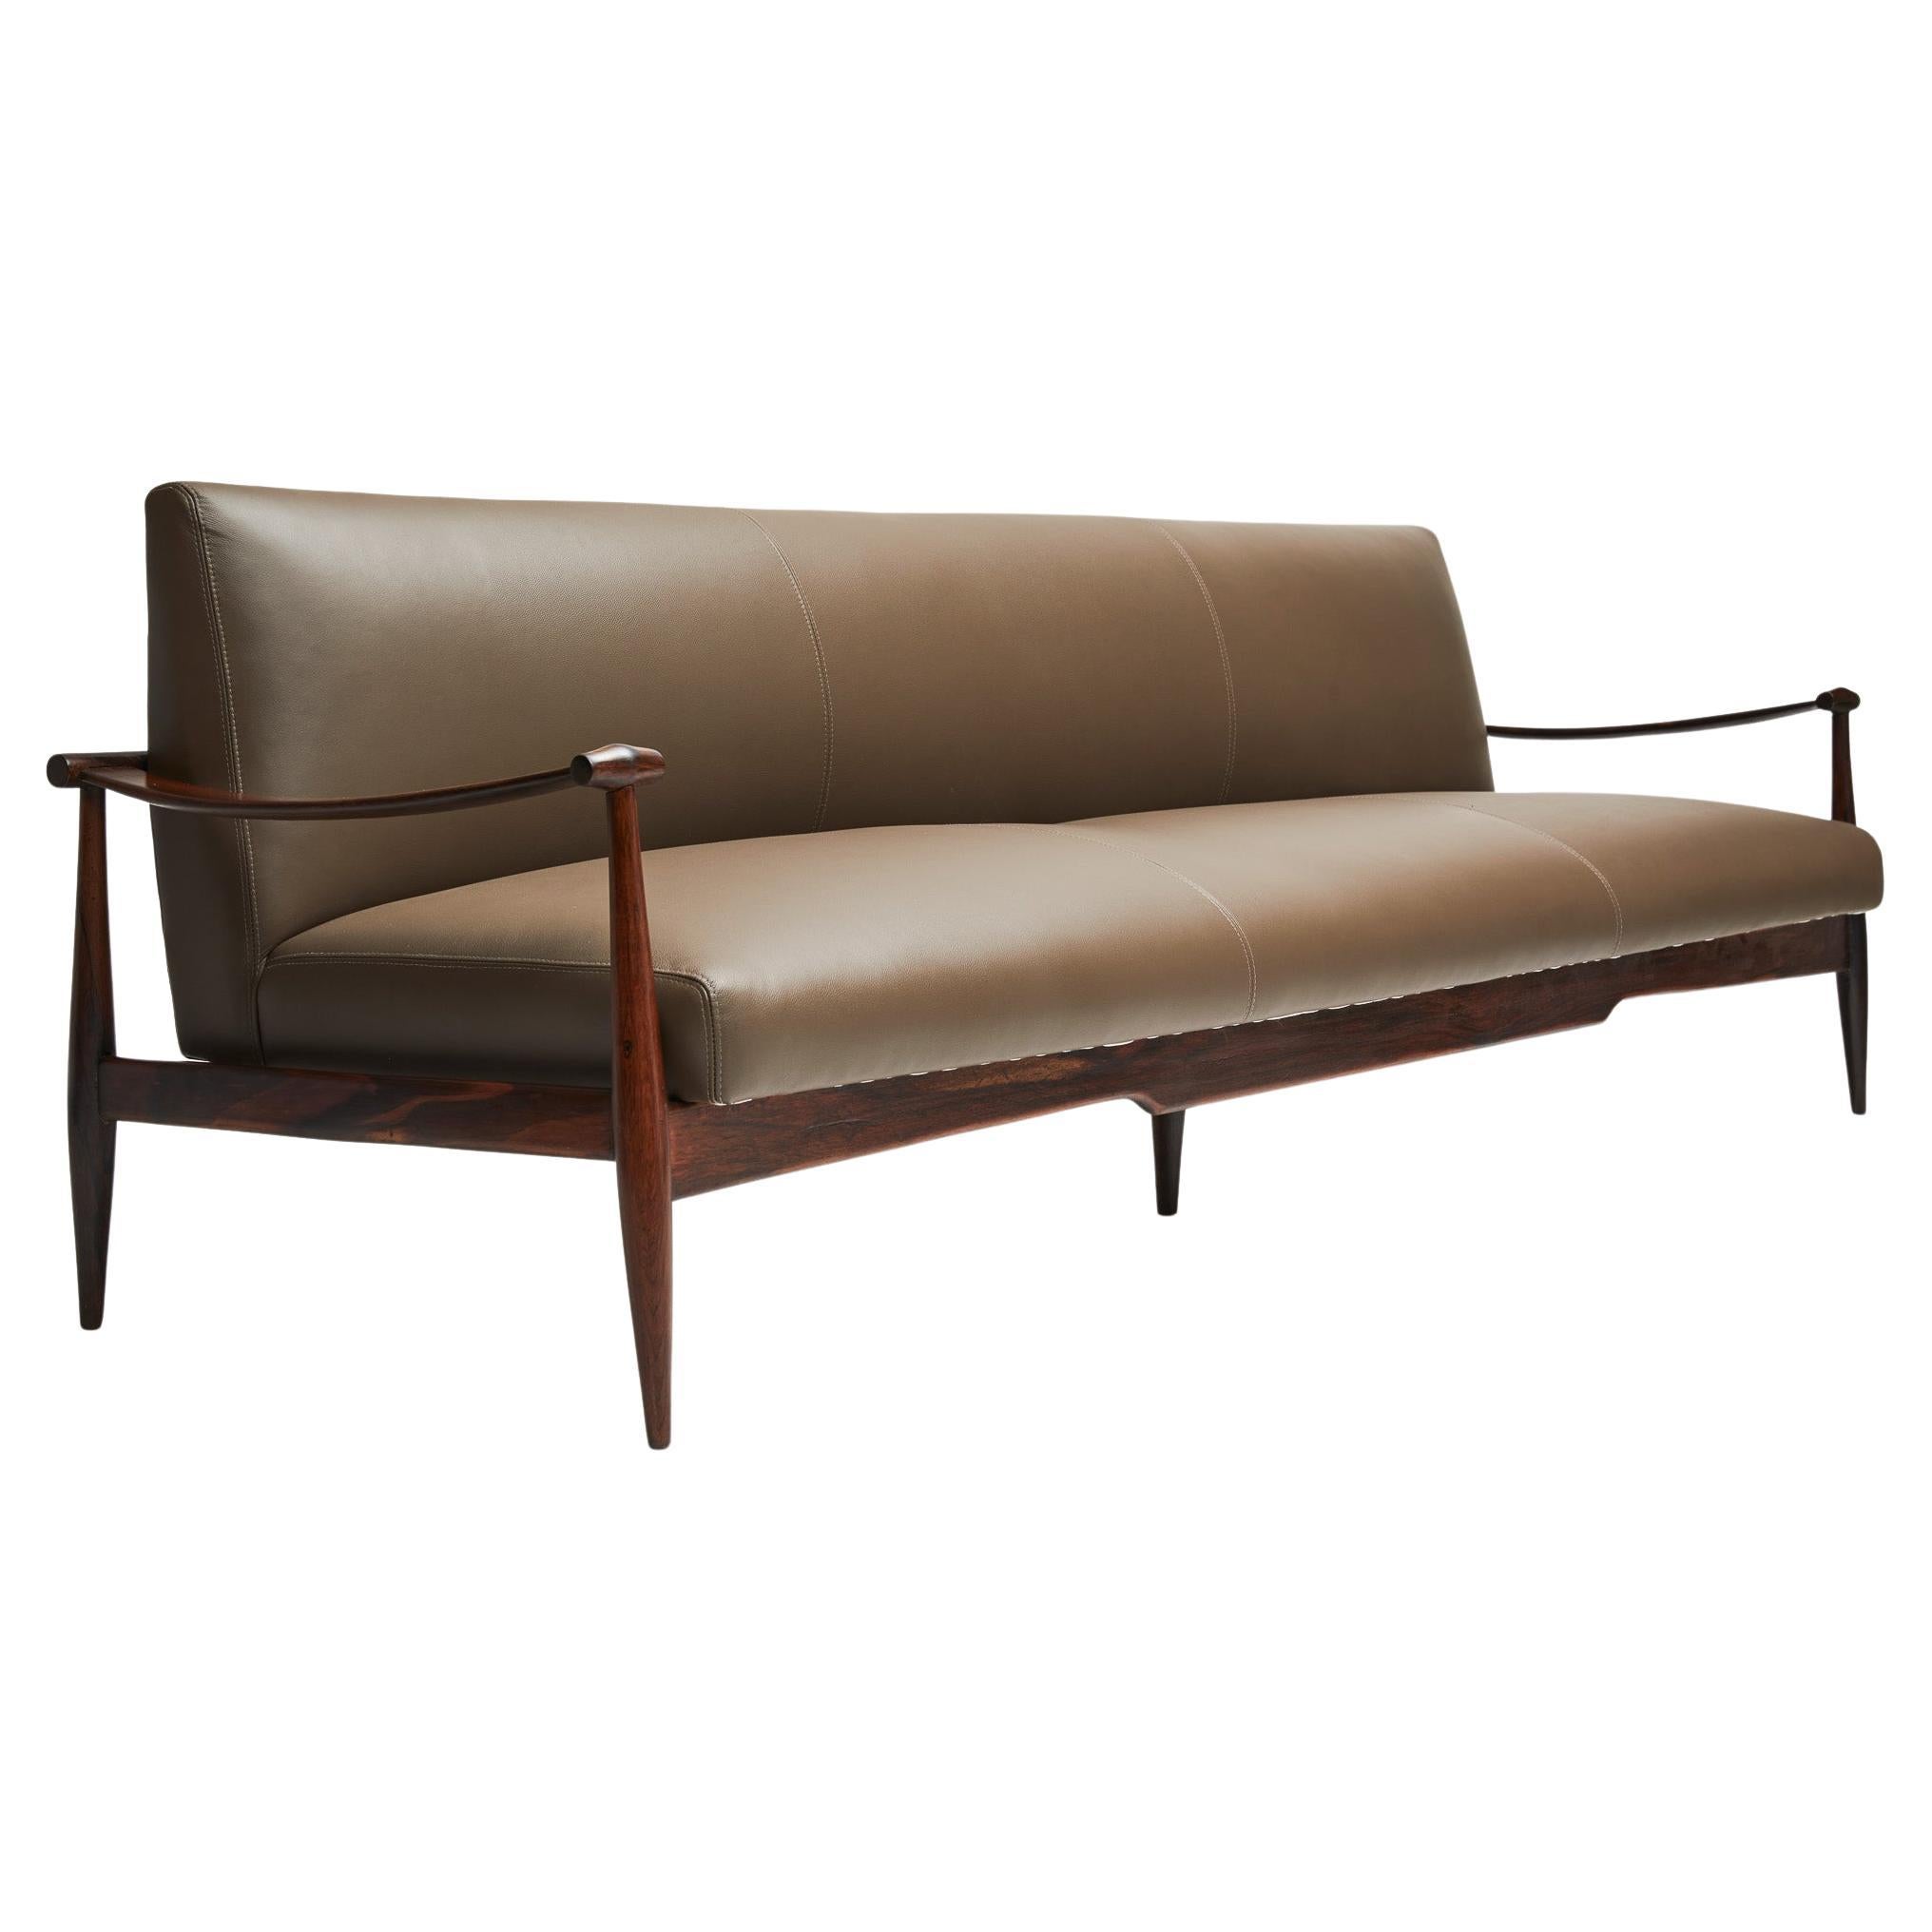 Available right now, with complimentary domestic shipping included this midcentury sofa in Brazilian Rosewood, as known as Jacaranda and brown leather designed by Liceu de Artes e Oficios is absolute stunning! 

The “Canoa” (canoe) model was